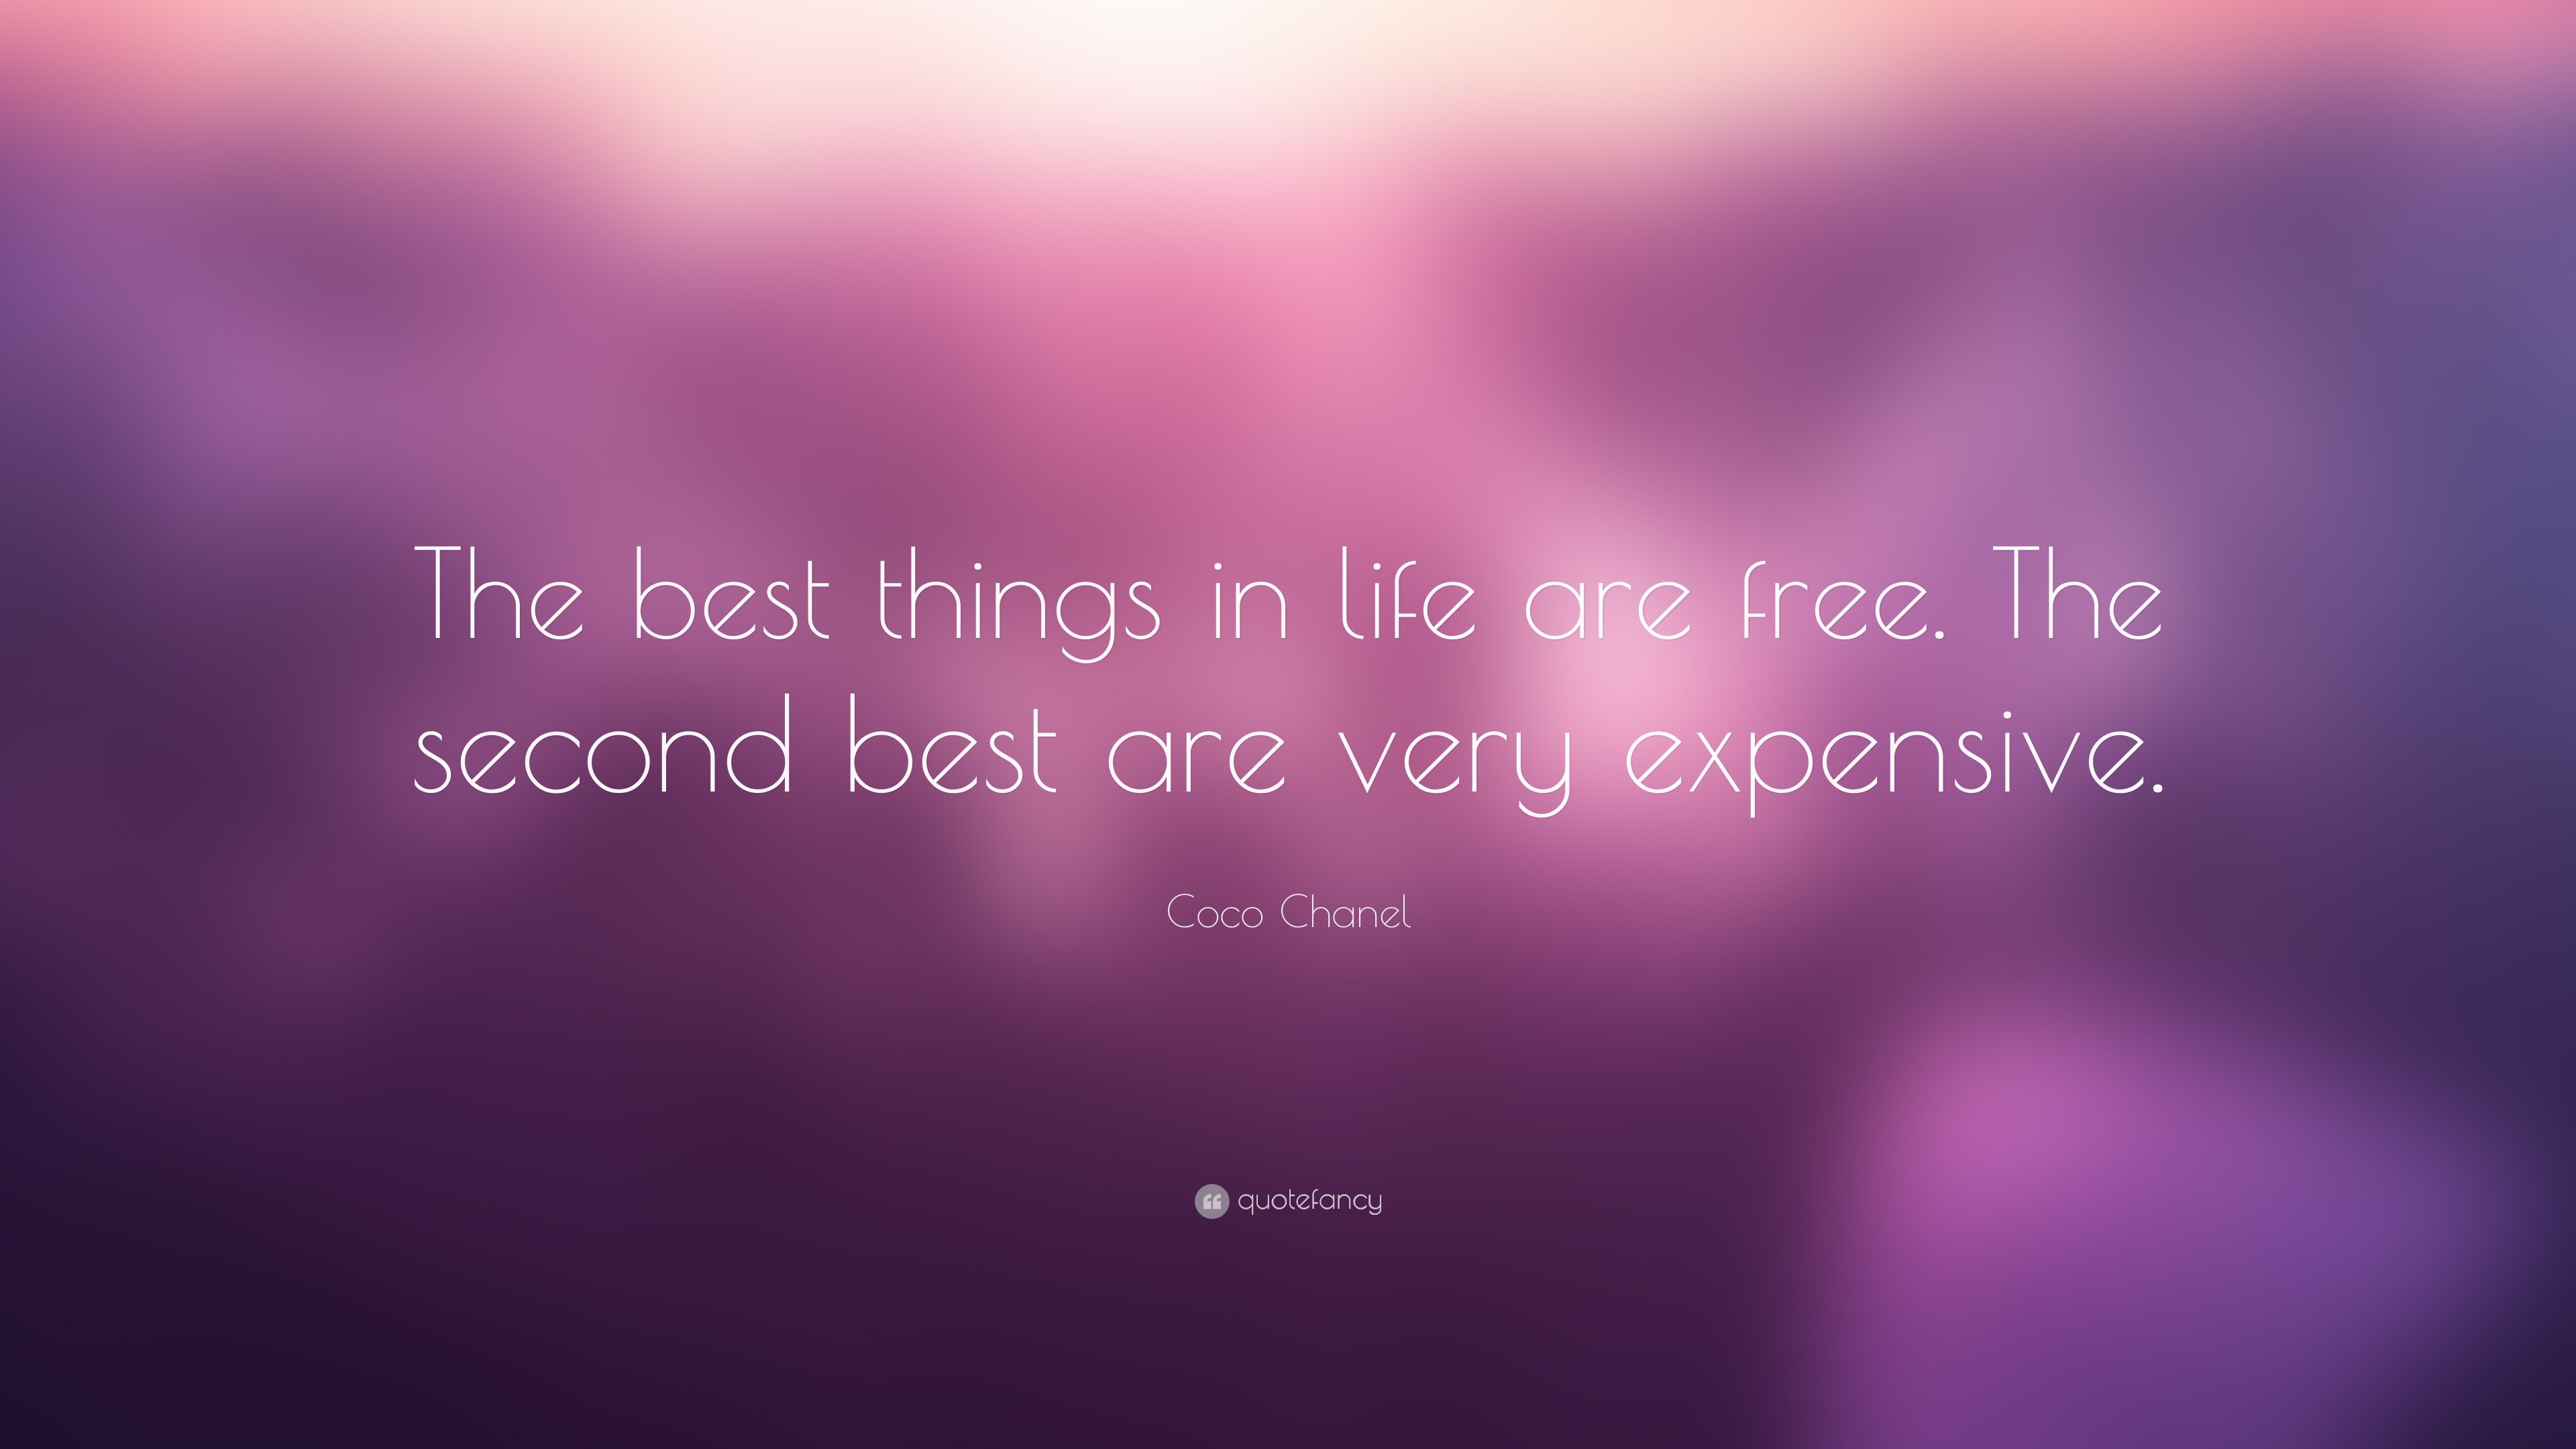 Coco Chanel Quote “The best things in life are free The second best